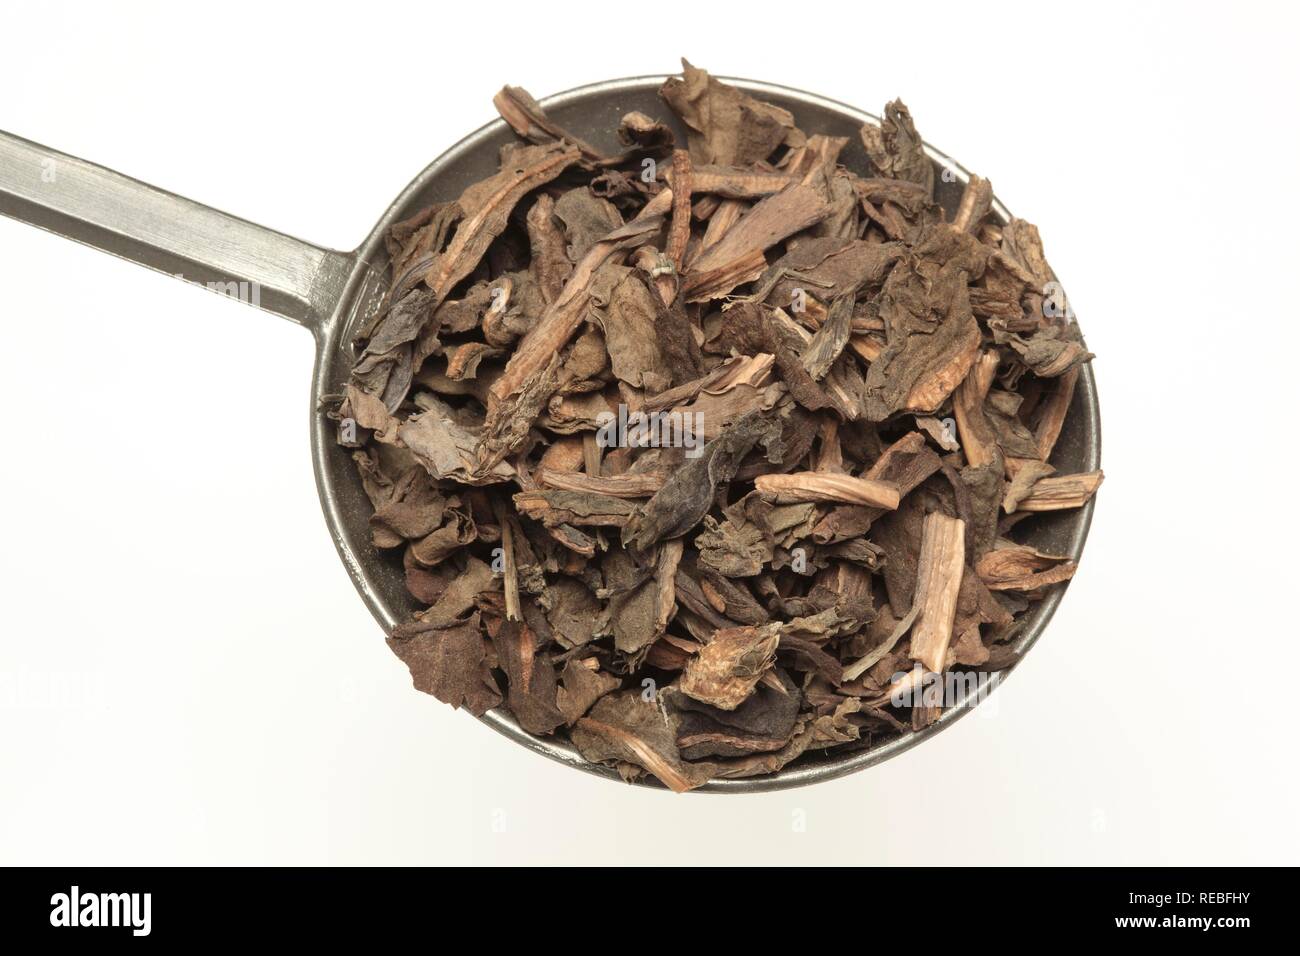 Dried leaves of the medicinal plant Chinese lizard tail, Chameleon plant, fishwort (Houttuynia cordata), Yu Xing Cao Stock Photo